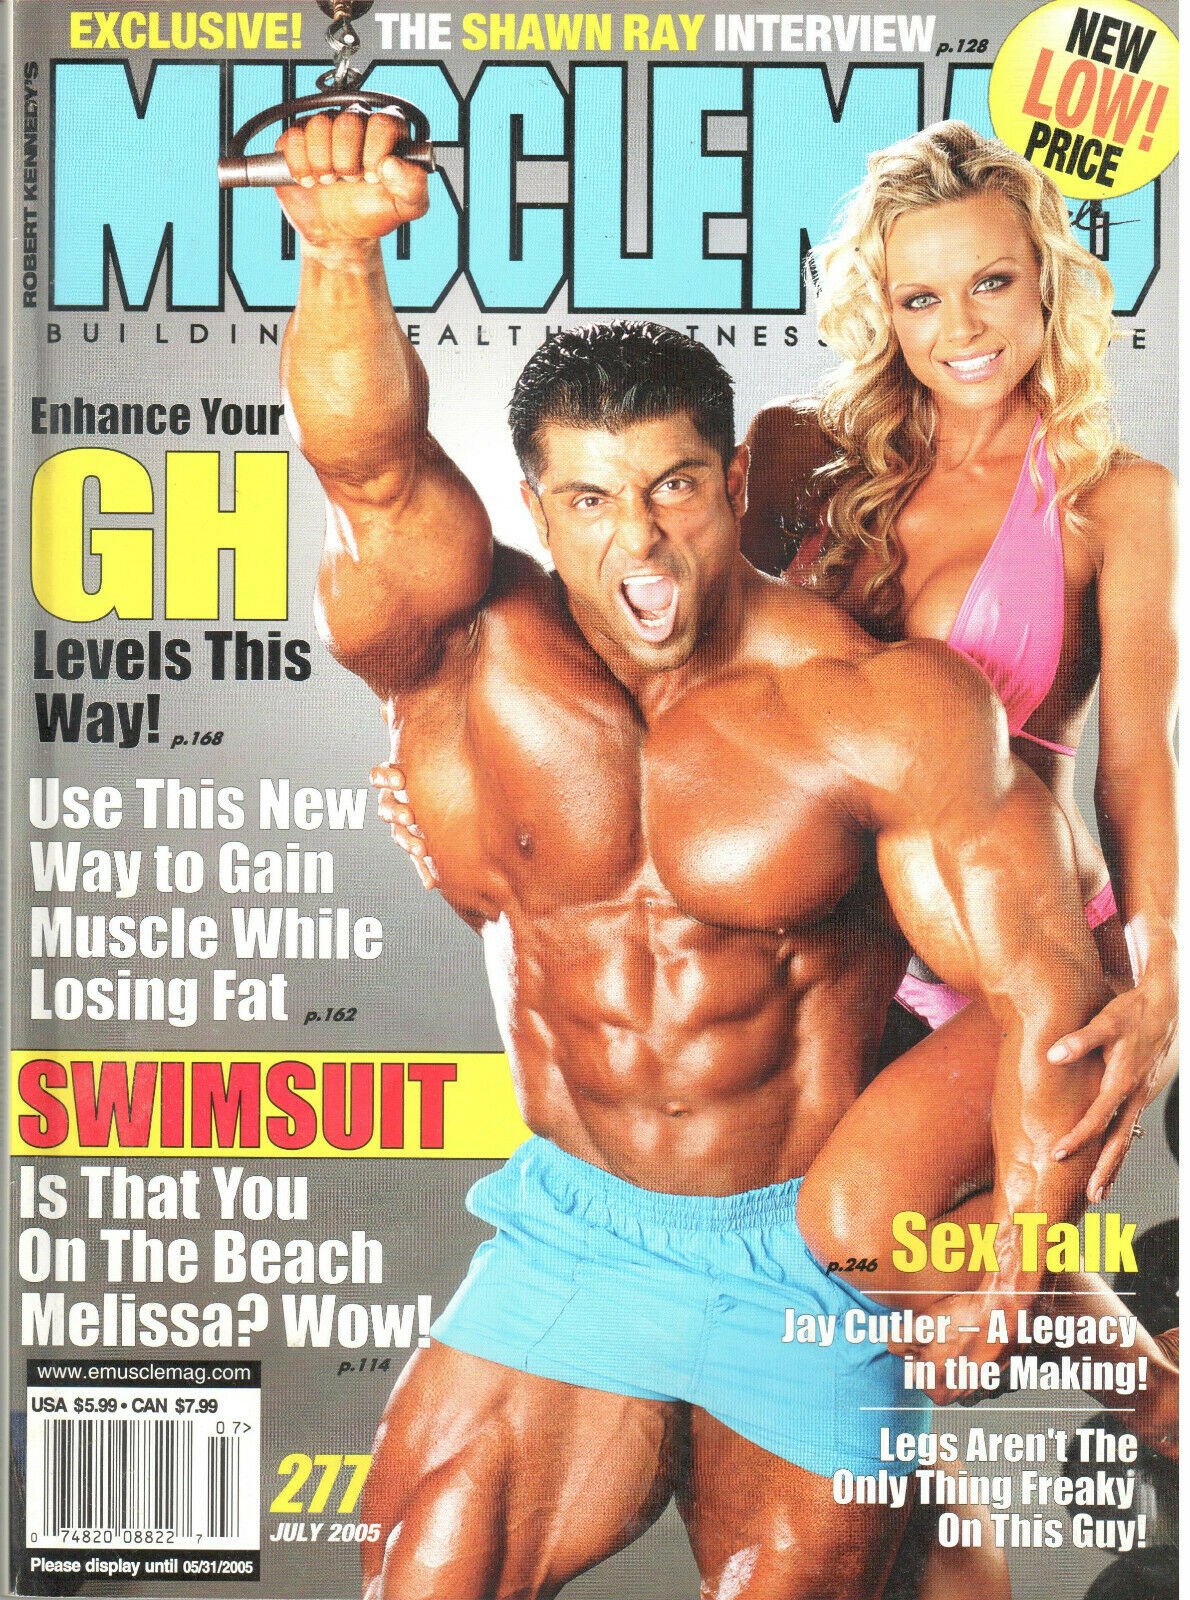 Muscle Mag July 2005 magazine back issue Muscle Mag magizine back copy Muscle Mag July 2005 Bodybuilding and Fitness Magazine Back Issue Published by Canadian Robert Kennedy and Founded in 1974. Enhance Your GH Levels This Way!.